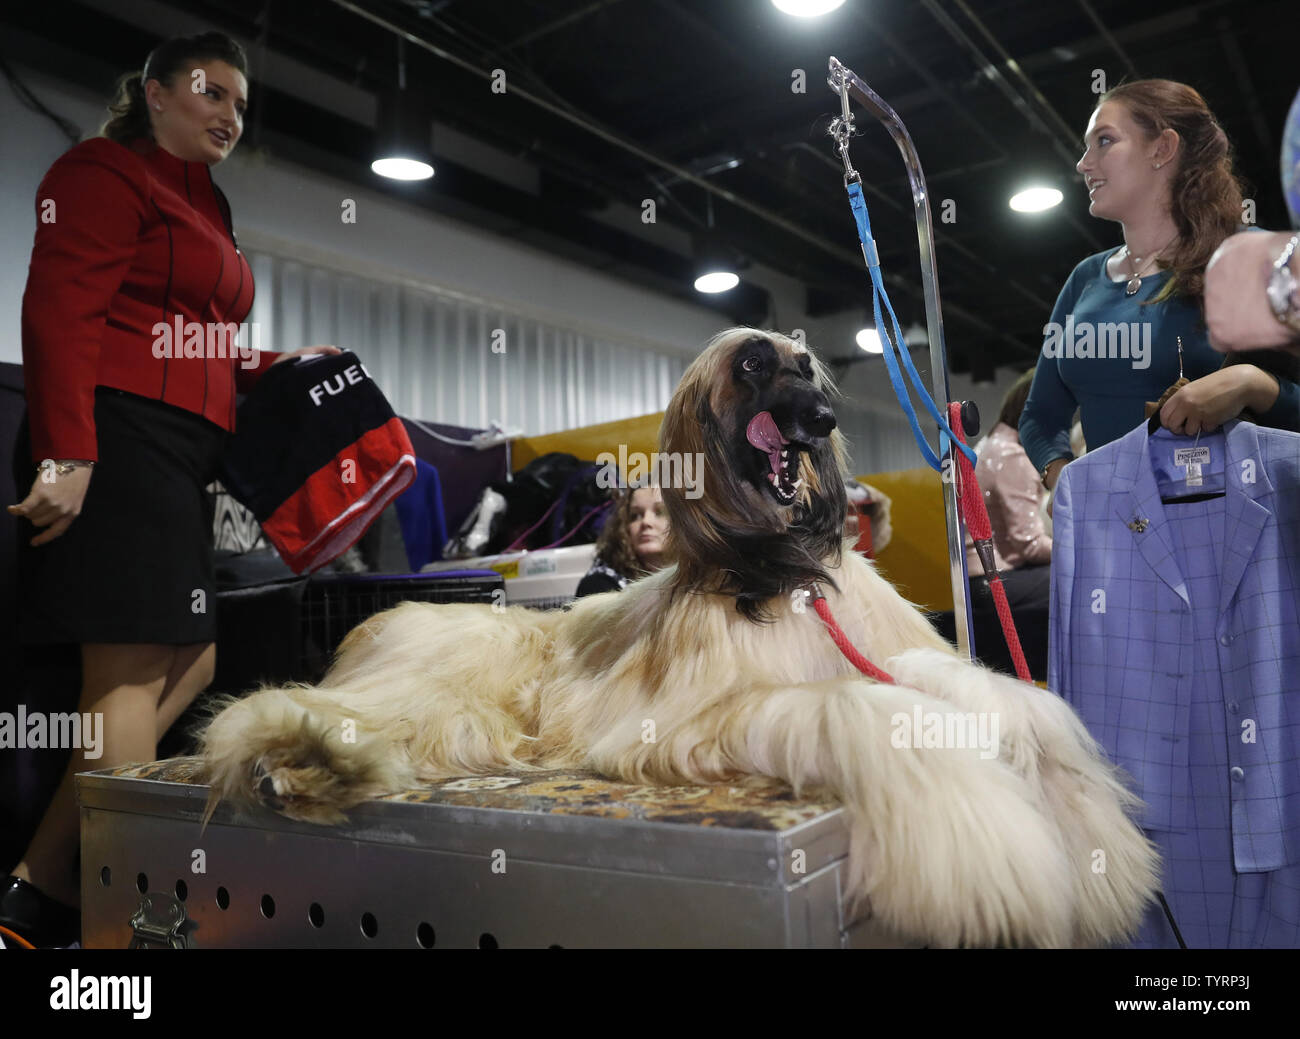 An Afghan Hound gets groomed backstage at best in breed competitions at the 141st Annual Westminster Kennel Club Dog Show st Pier 92 in New York City on February 13, 2017. Three breeds including the American Hairless Terrier, the Pumi and the Sloughi will make their debut this year. Best in show will be decided at Madison Square Garden on Tuesday night. The first Westminster show was held on May 8, 1877, making it the second-longest continuously held sporting event in the United States behind only the Kentucky Derby, which was first held in 1875.     Photo by John Angelillo/UPI Stock Photo